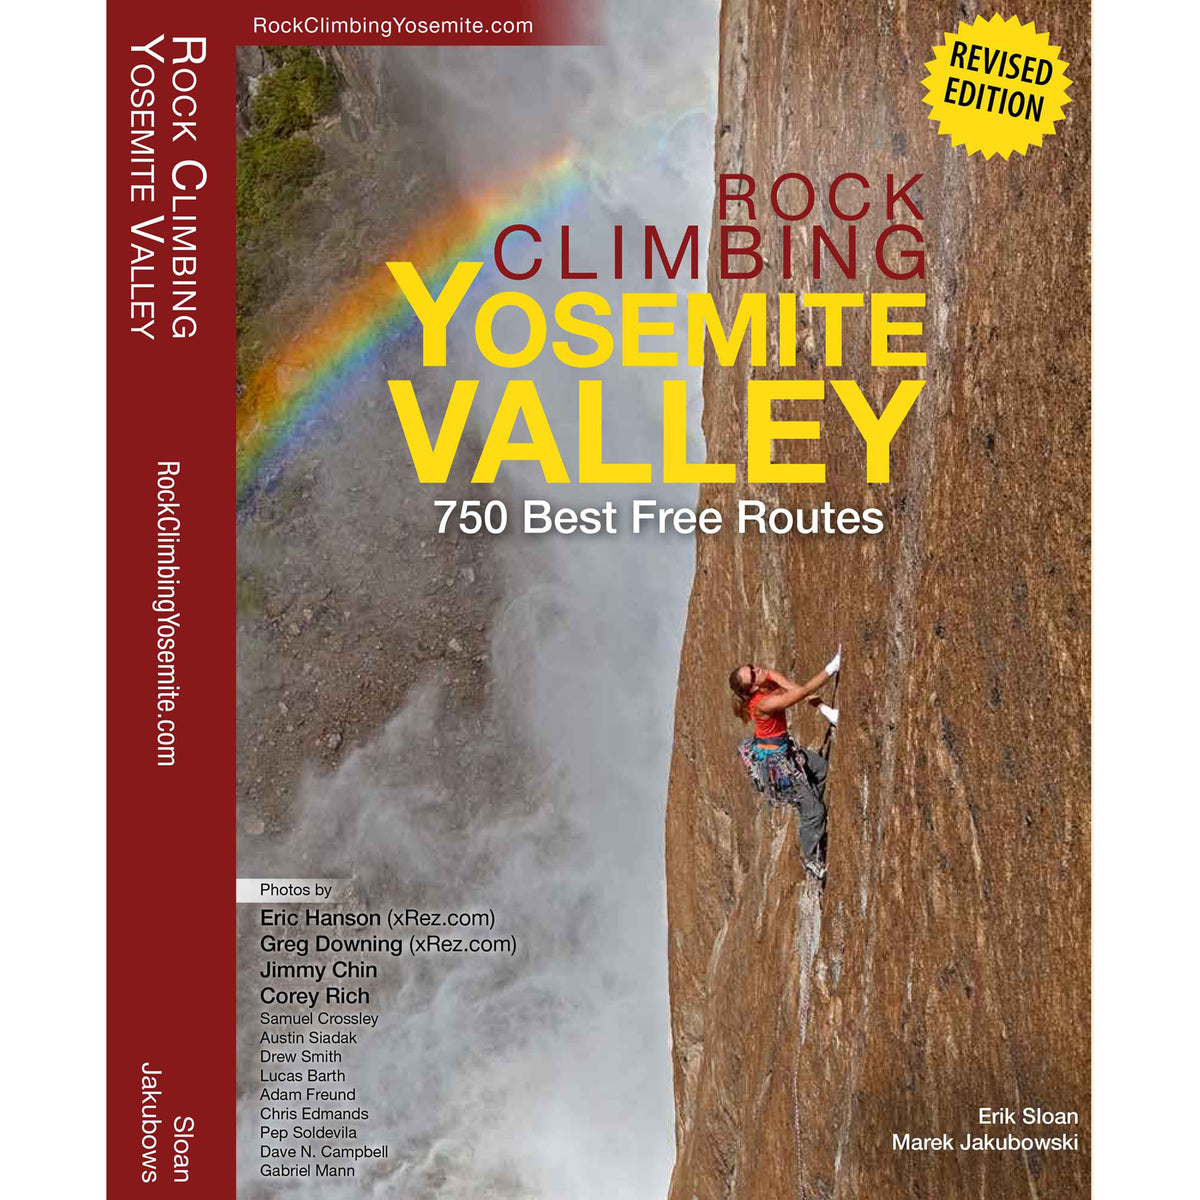 The cover of the yosemite valley climbing guide